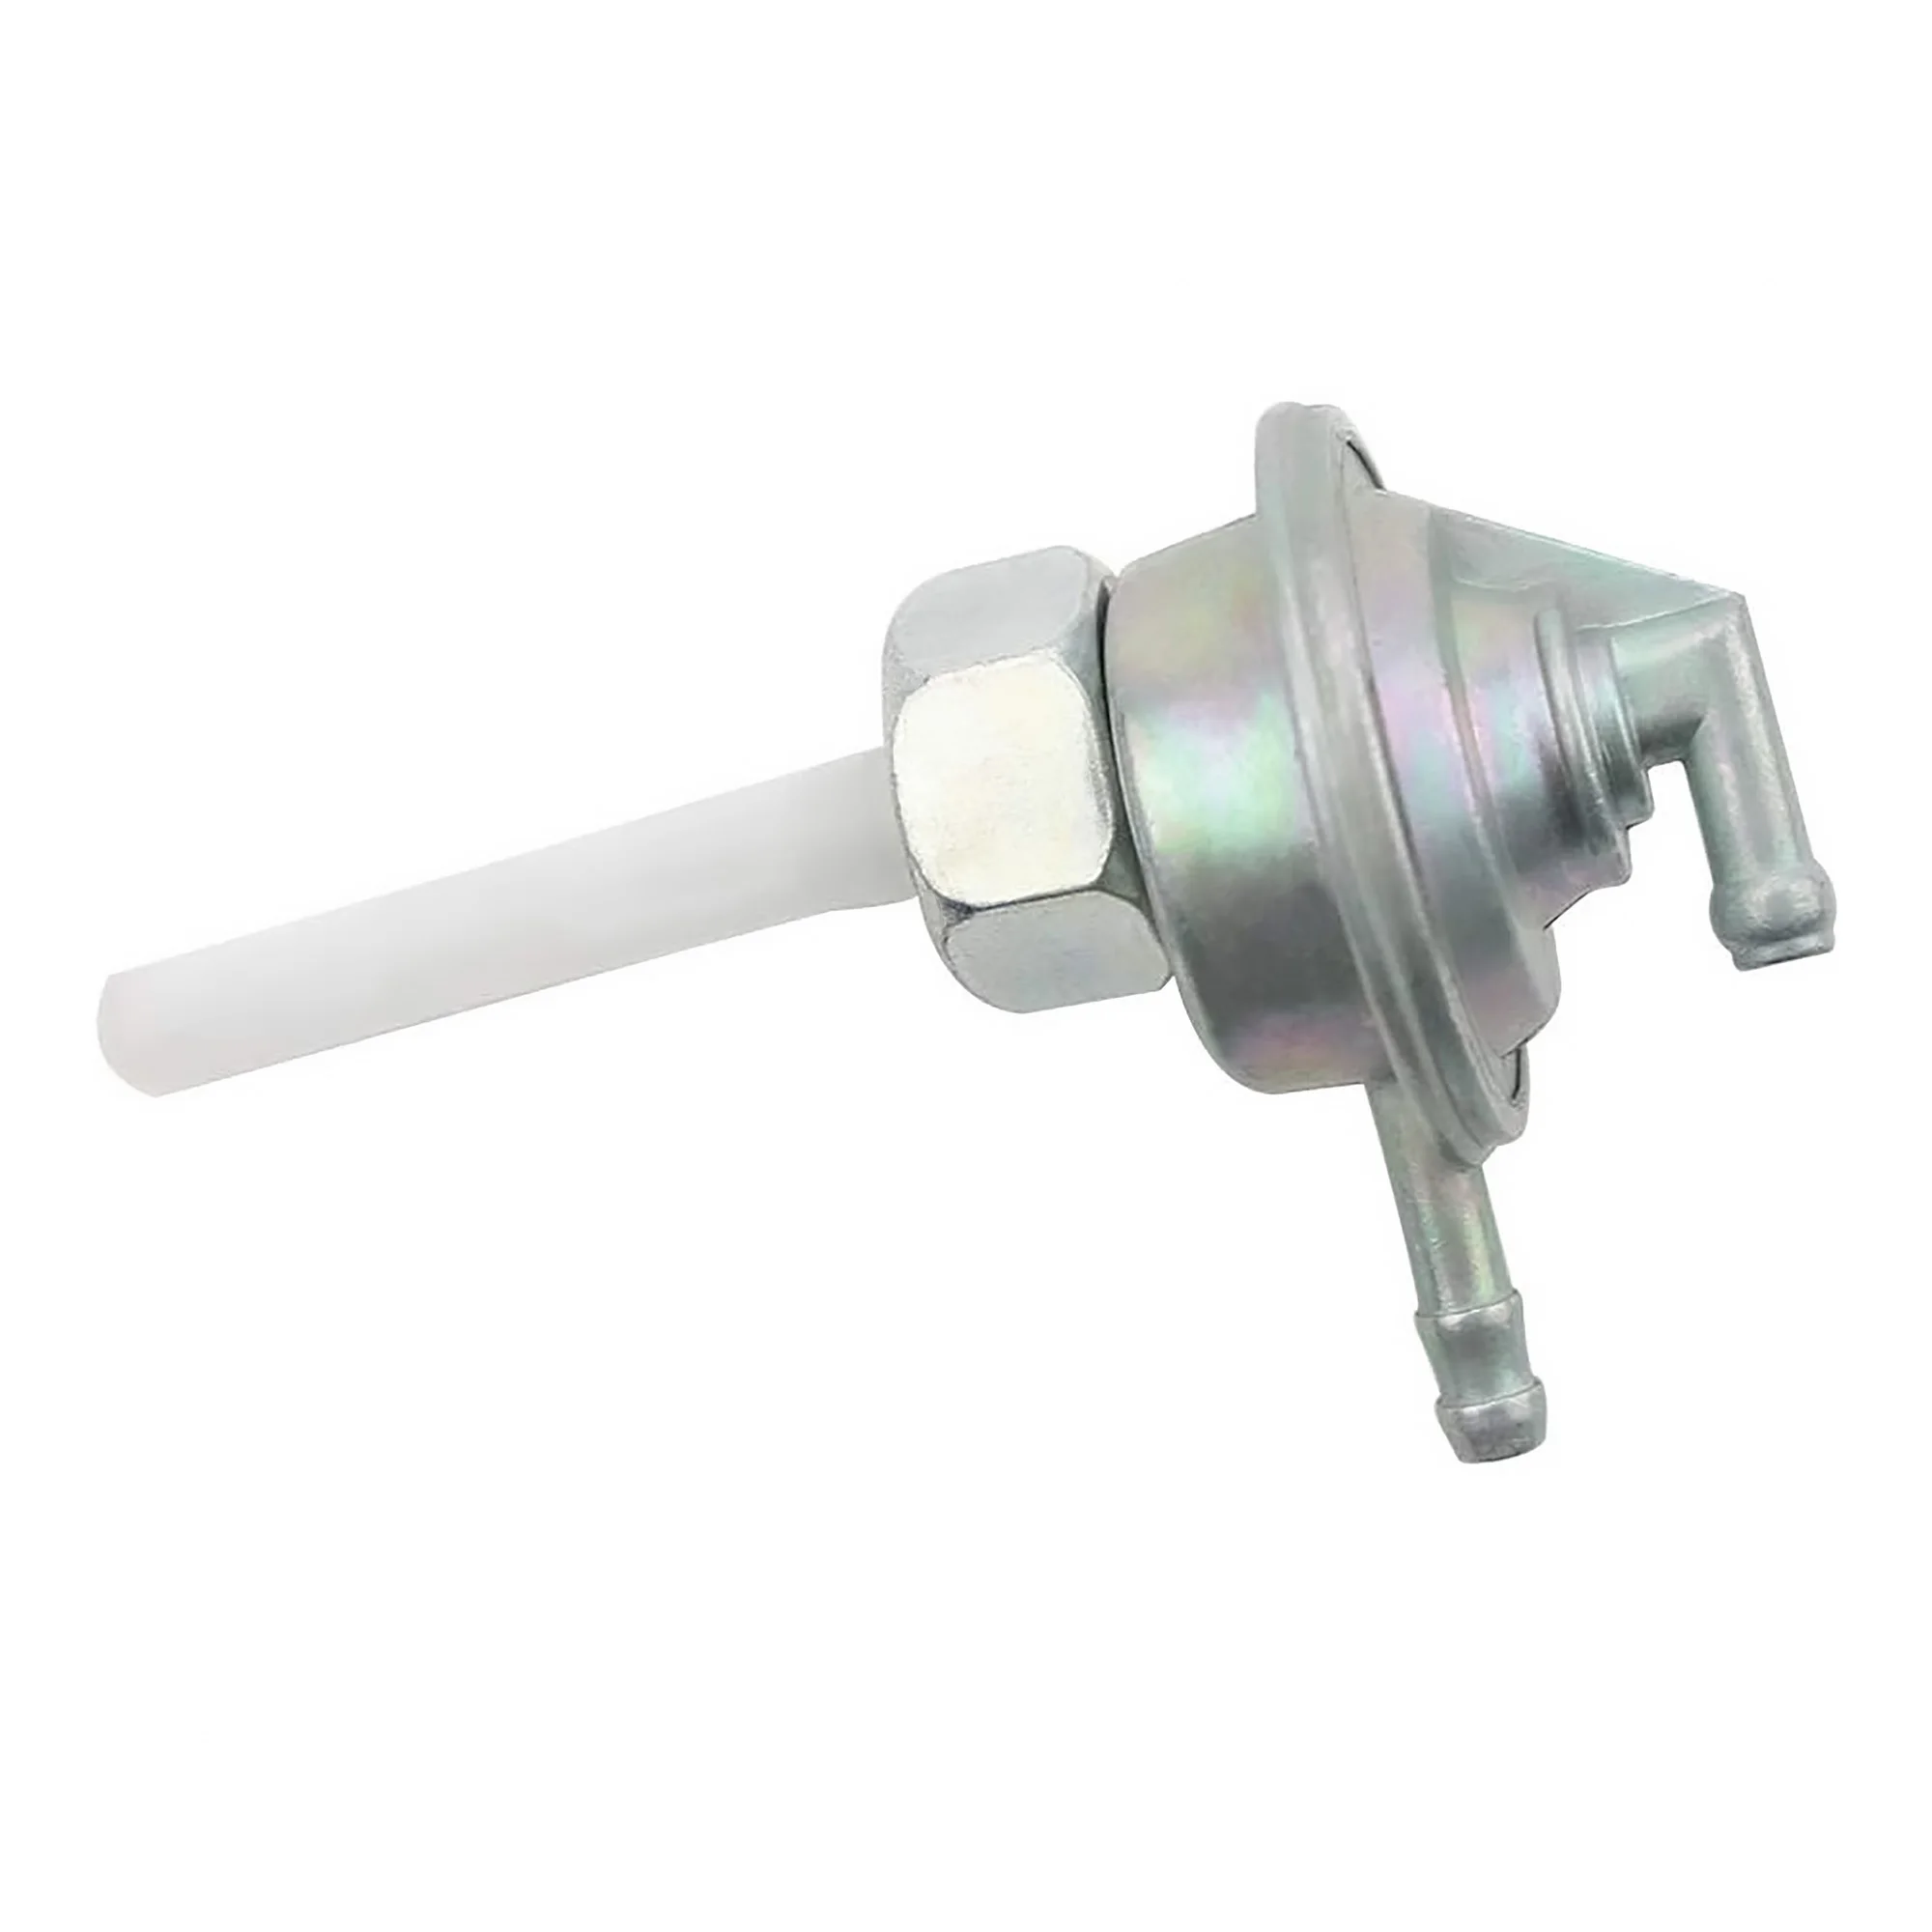 

GOOFIT Fuel Pump Valve Petcock Filter Low-tension Switch Replacement for GY6 50cc-150cc ATV Go Kart Moped Scooter